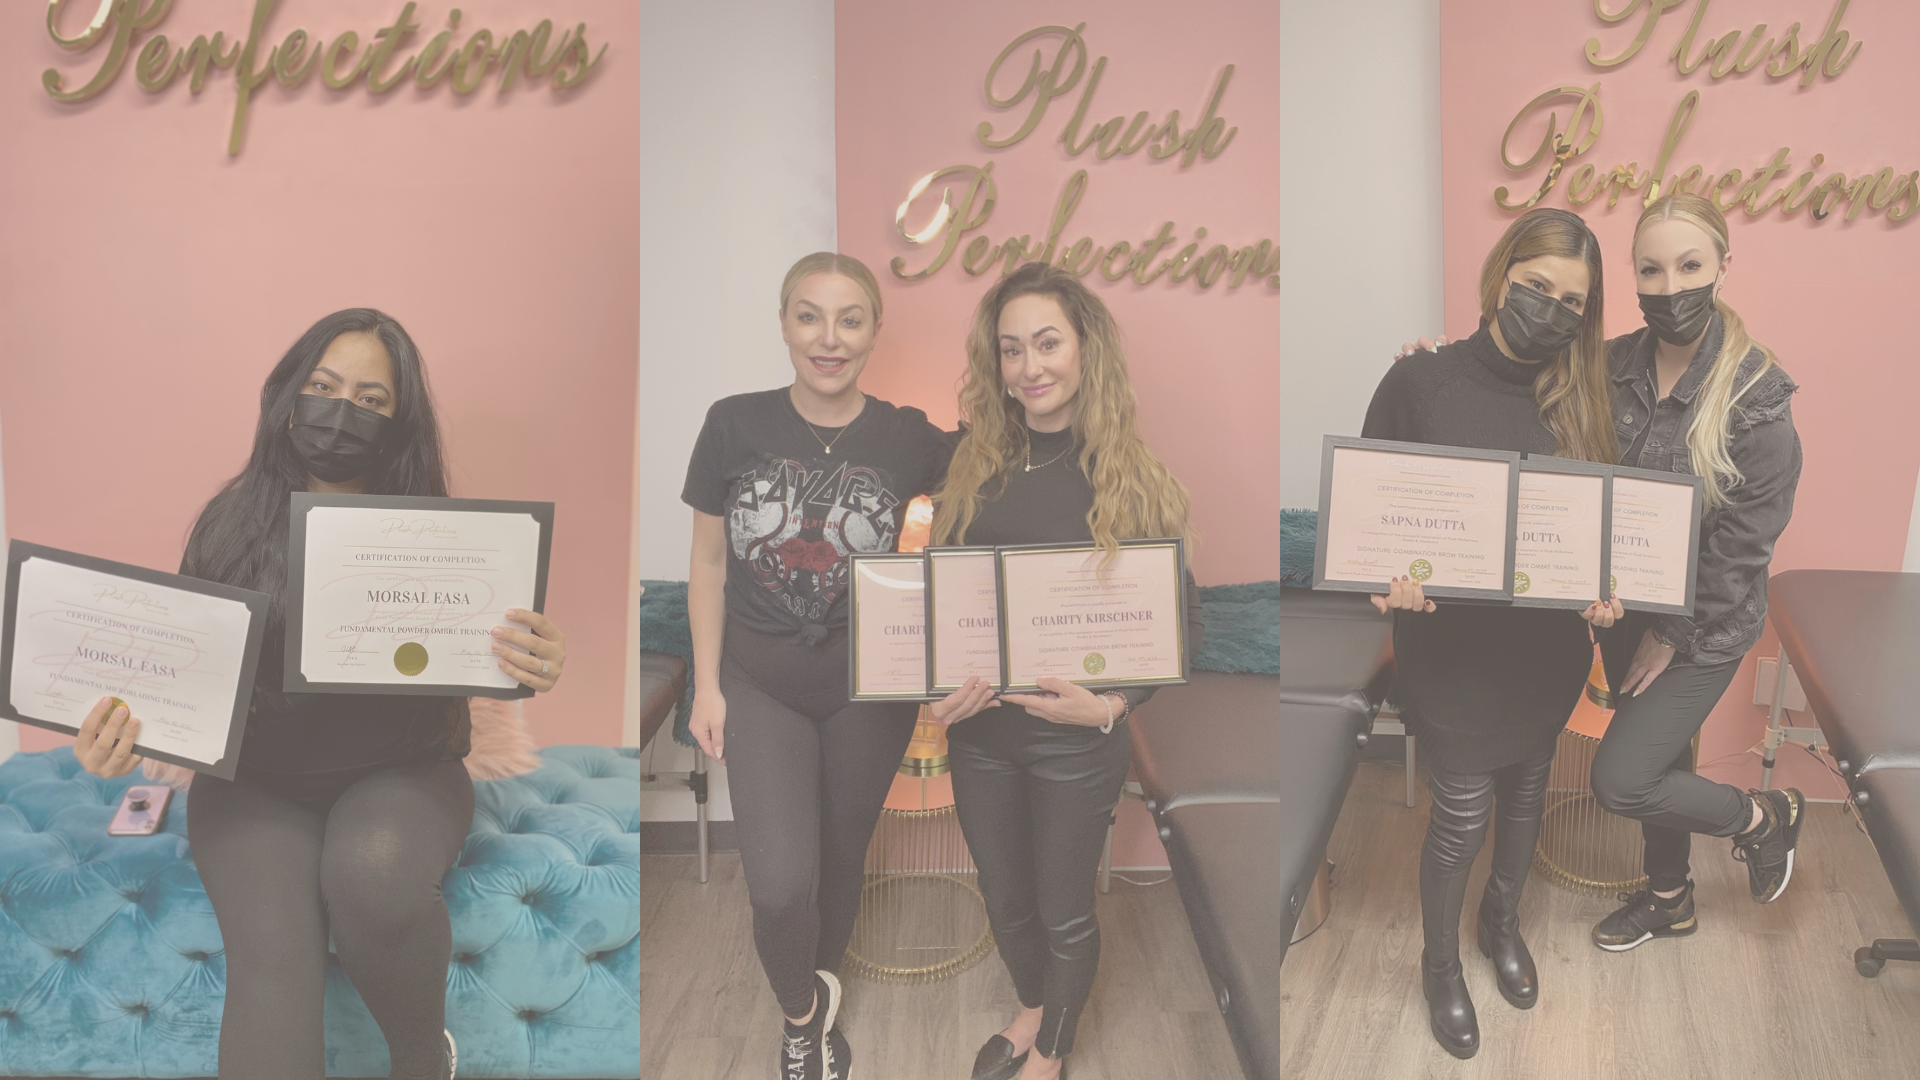 Plush Perfections Microblading, Powder, Nano Brow Training in Vancouver